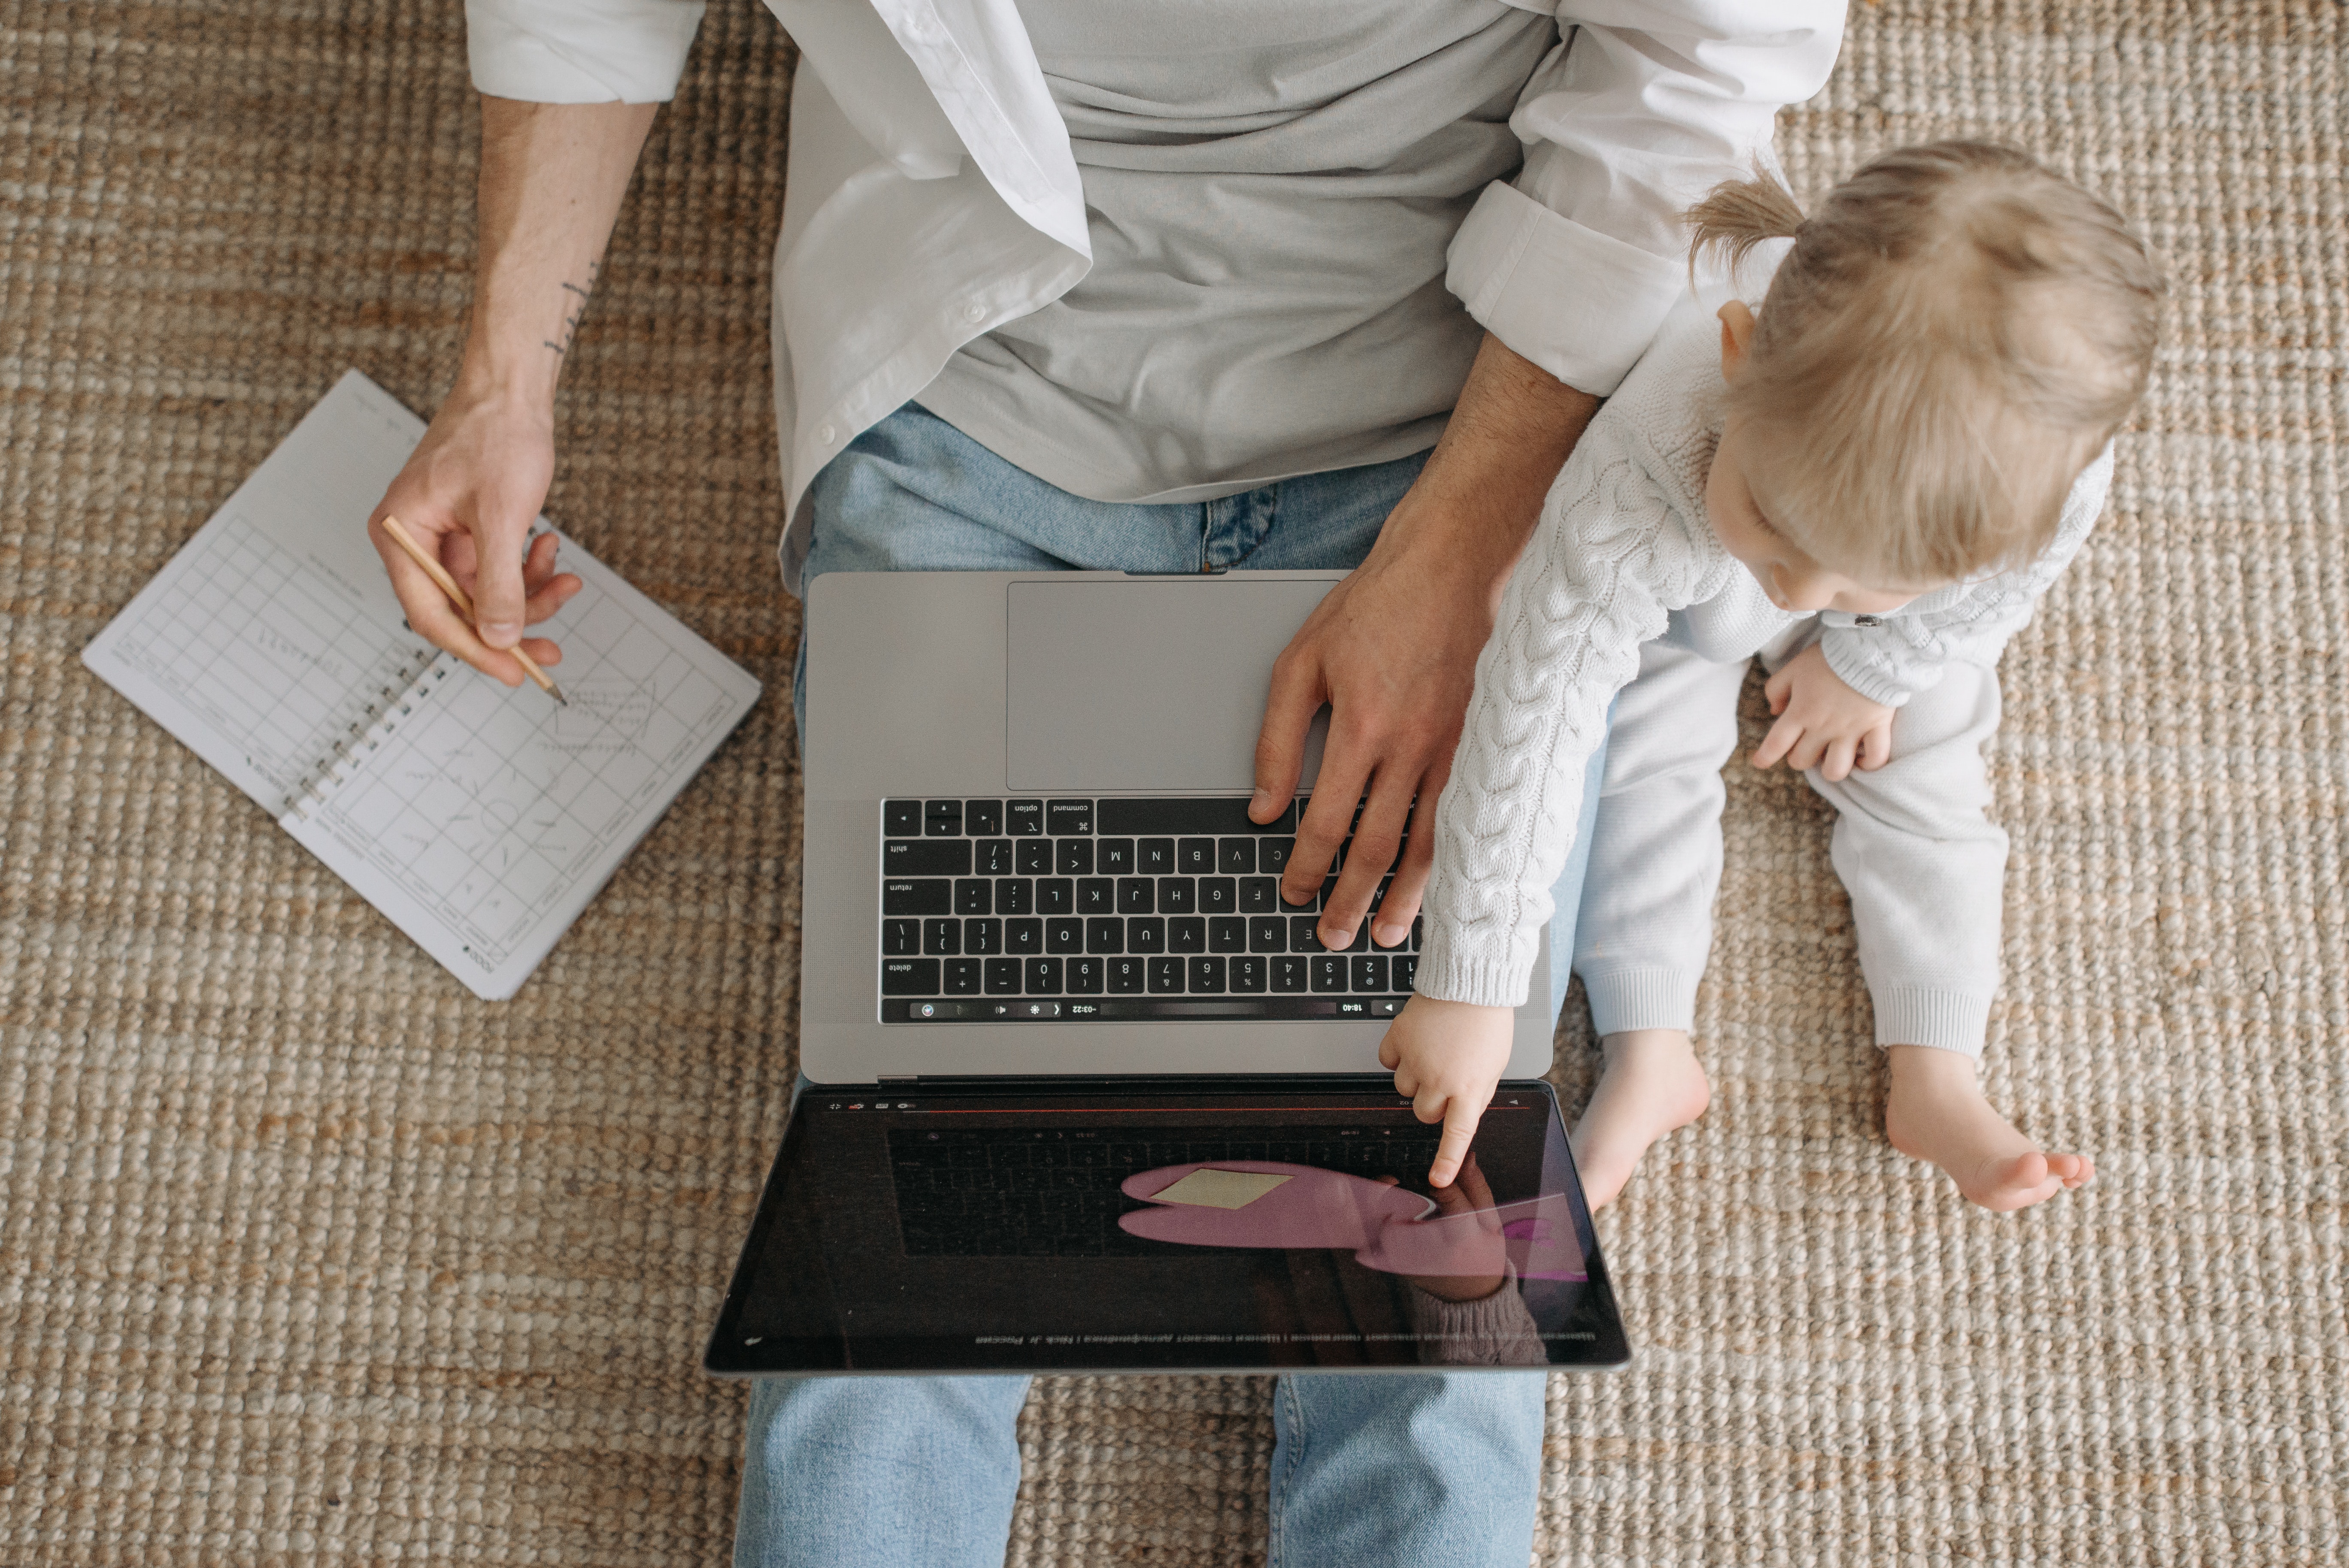 Stock photo featuring parent and child on floor with laptop and notebook open.